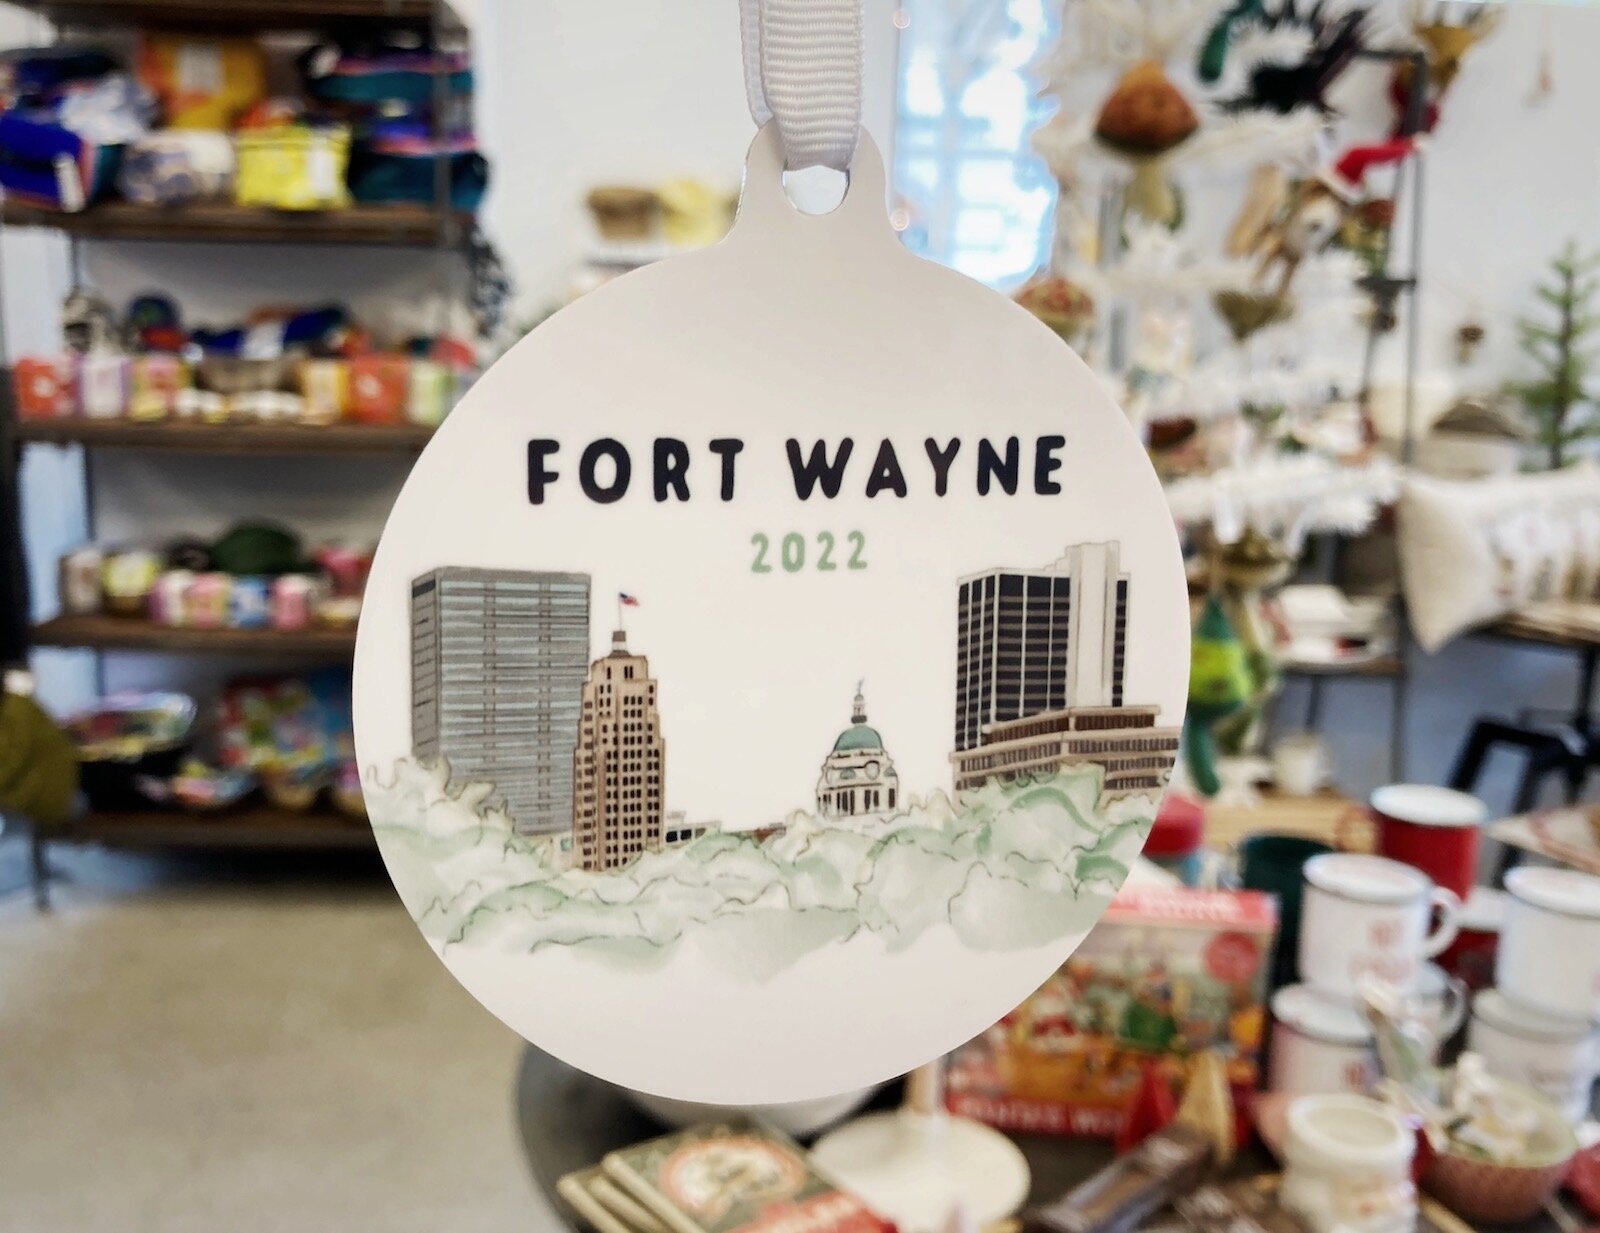 Holiday ornaments at the Find by local artist VimmAnnVigor.